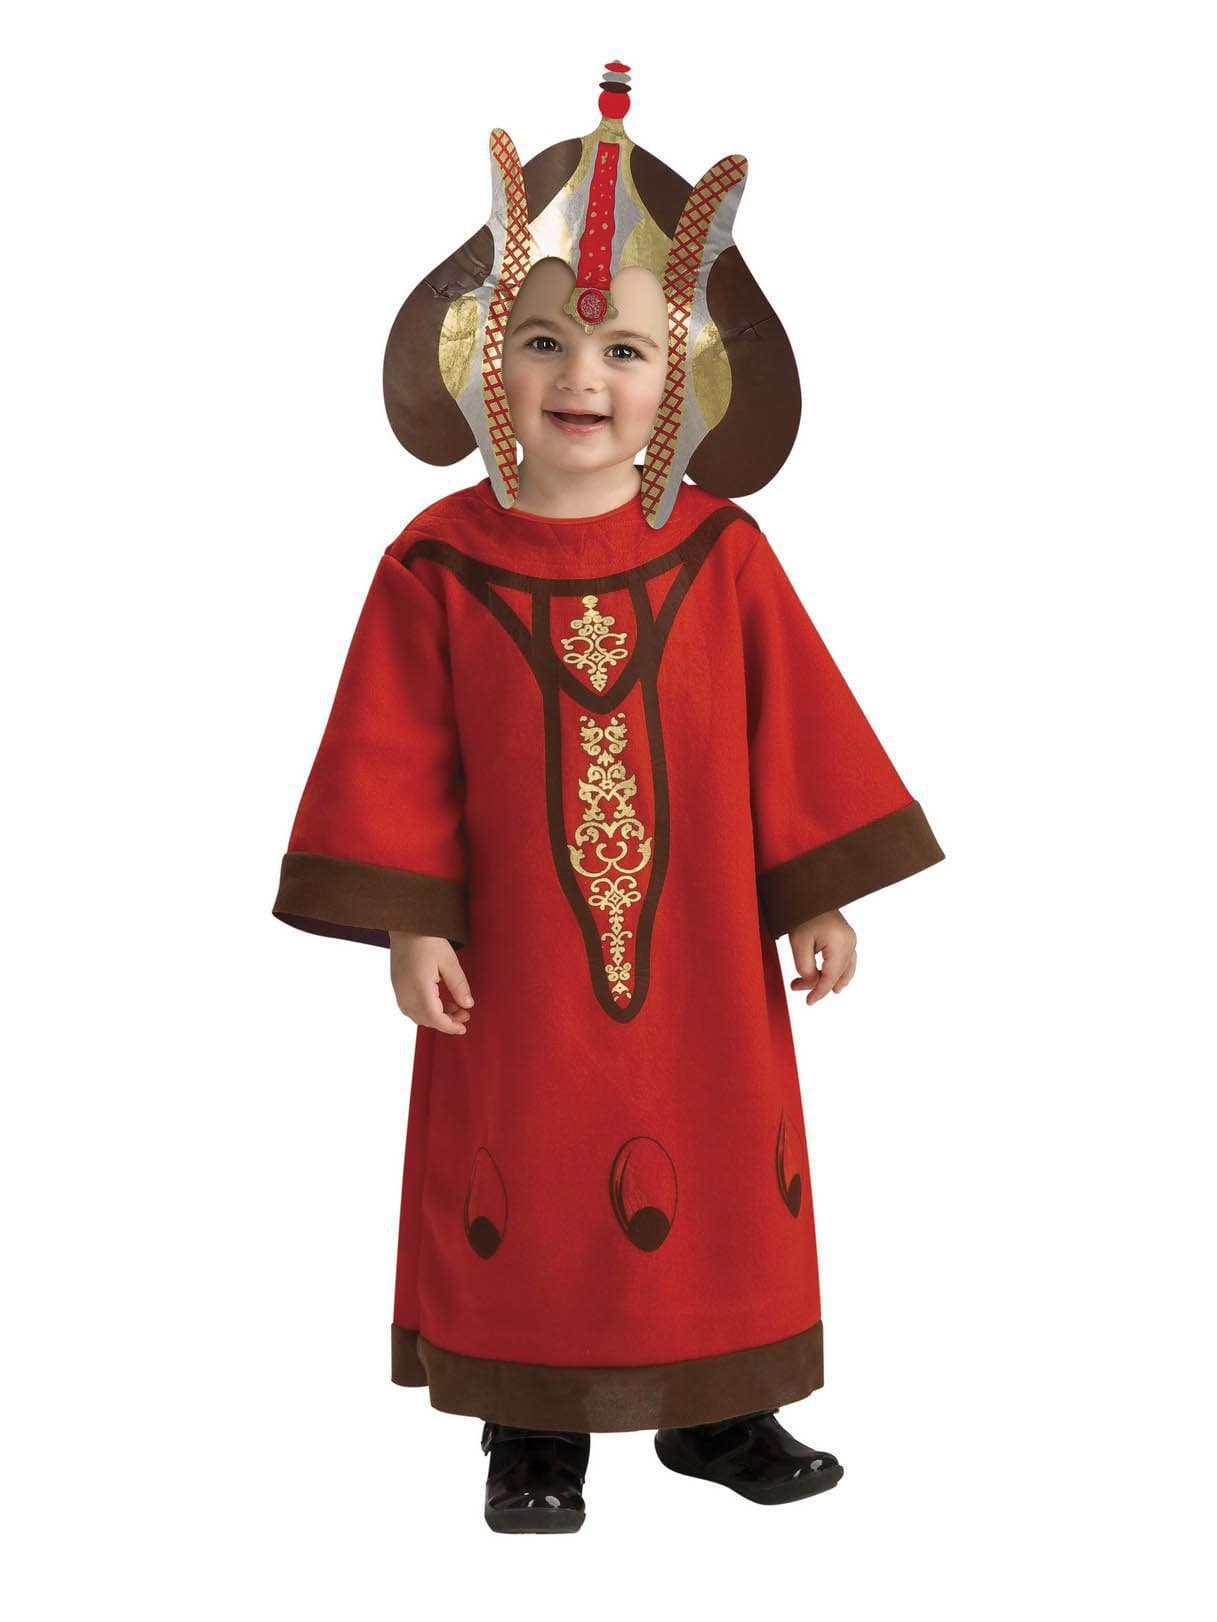 Baby/Toddler Classic Star Wars Queen Amidala Costume - costumes.com